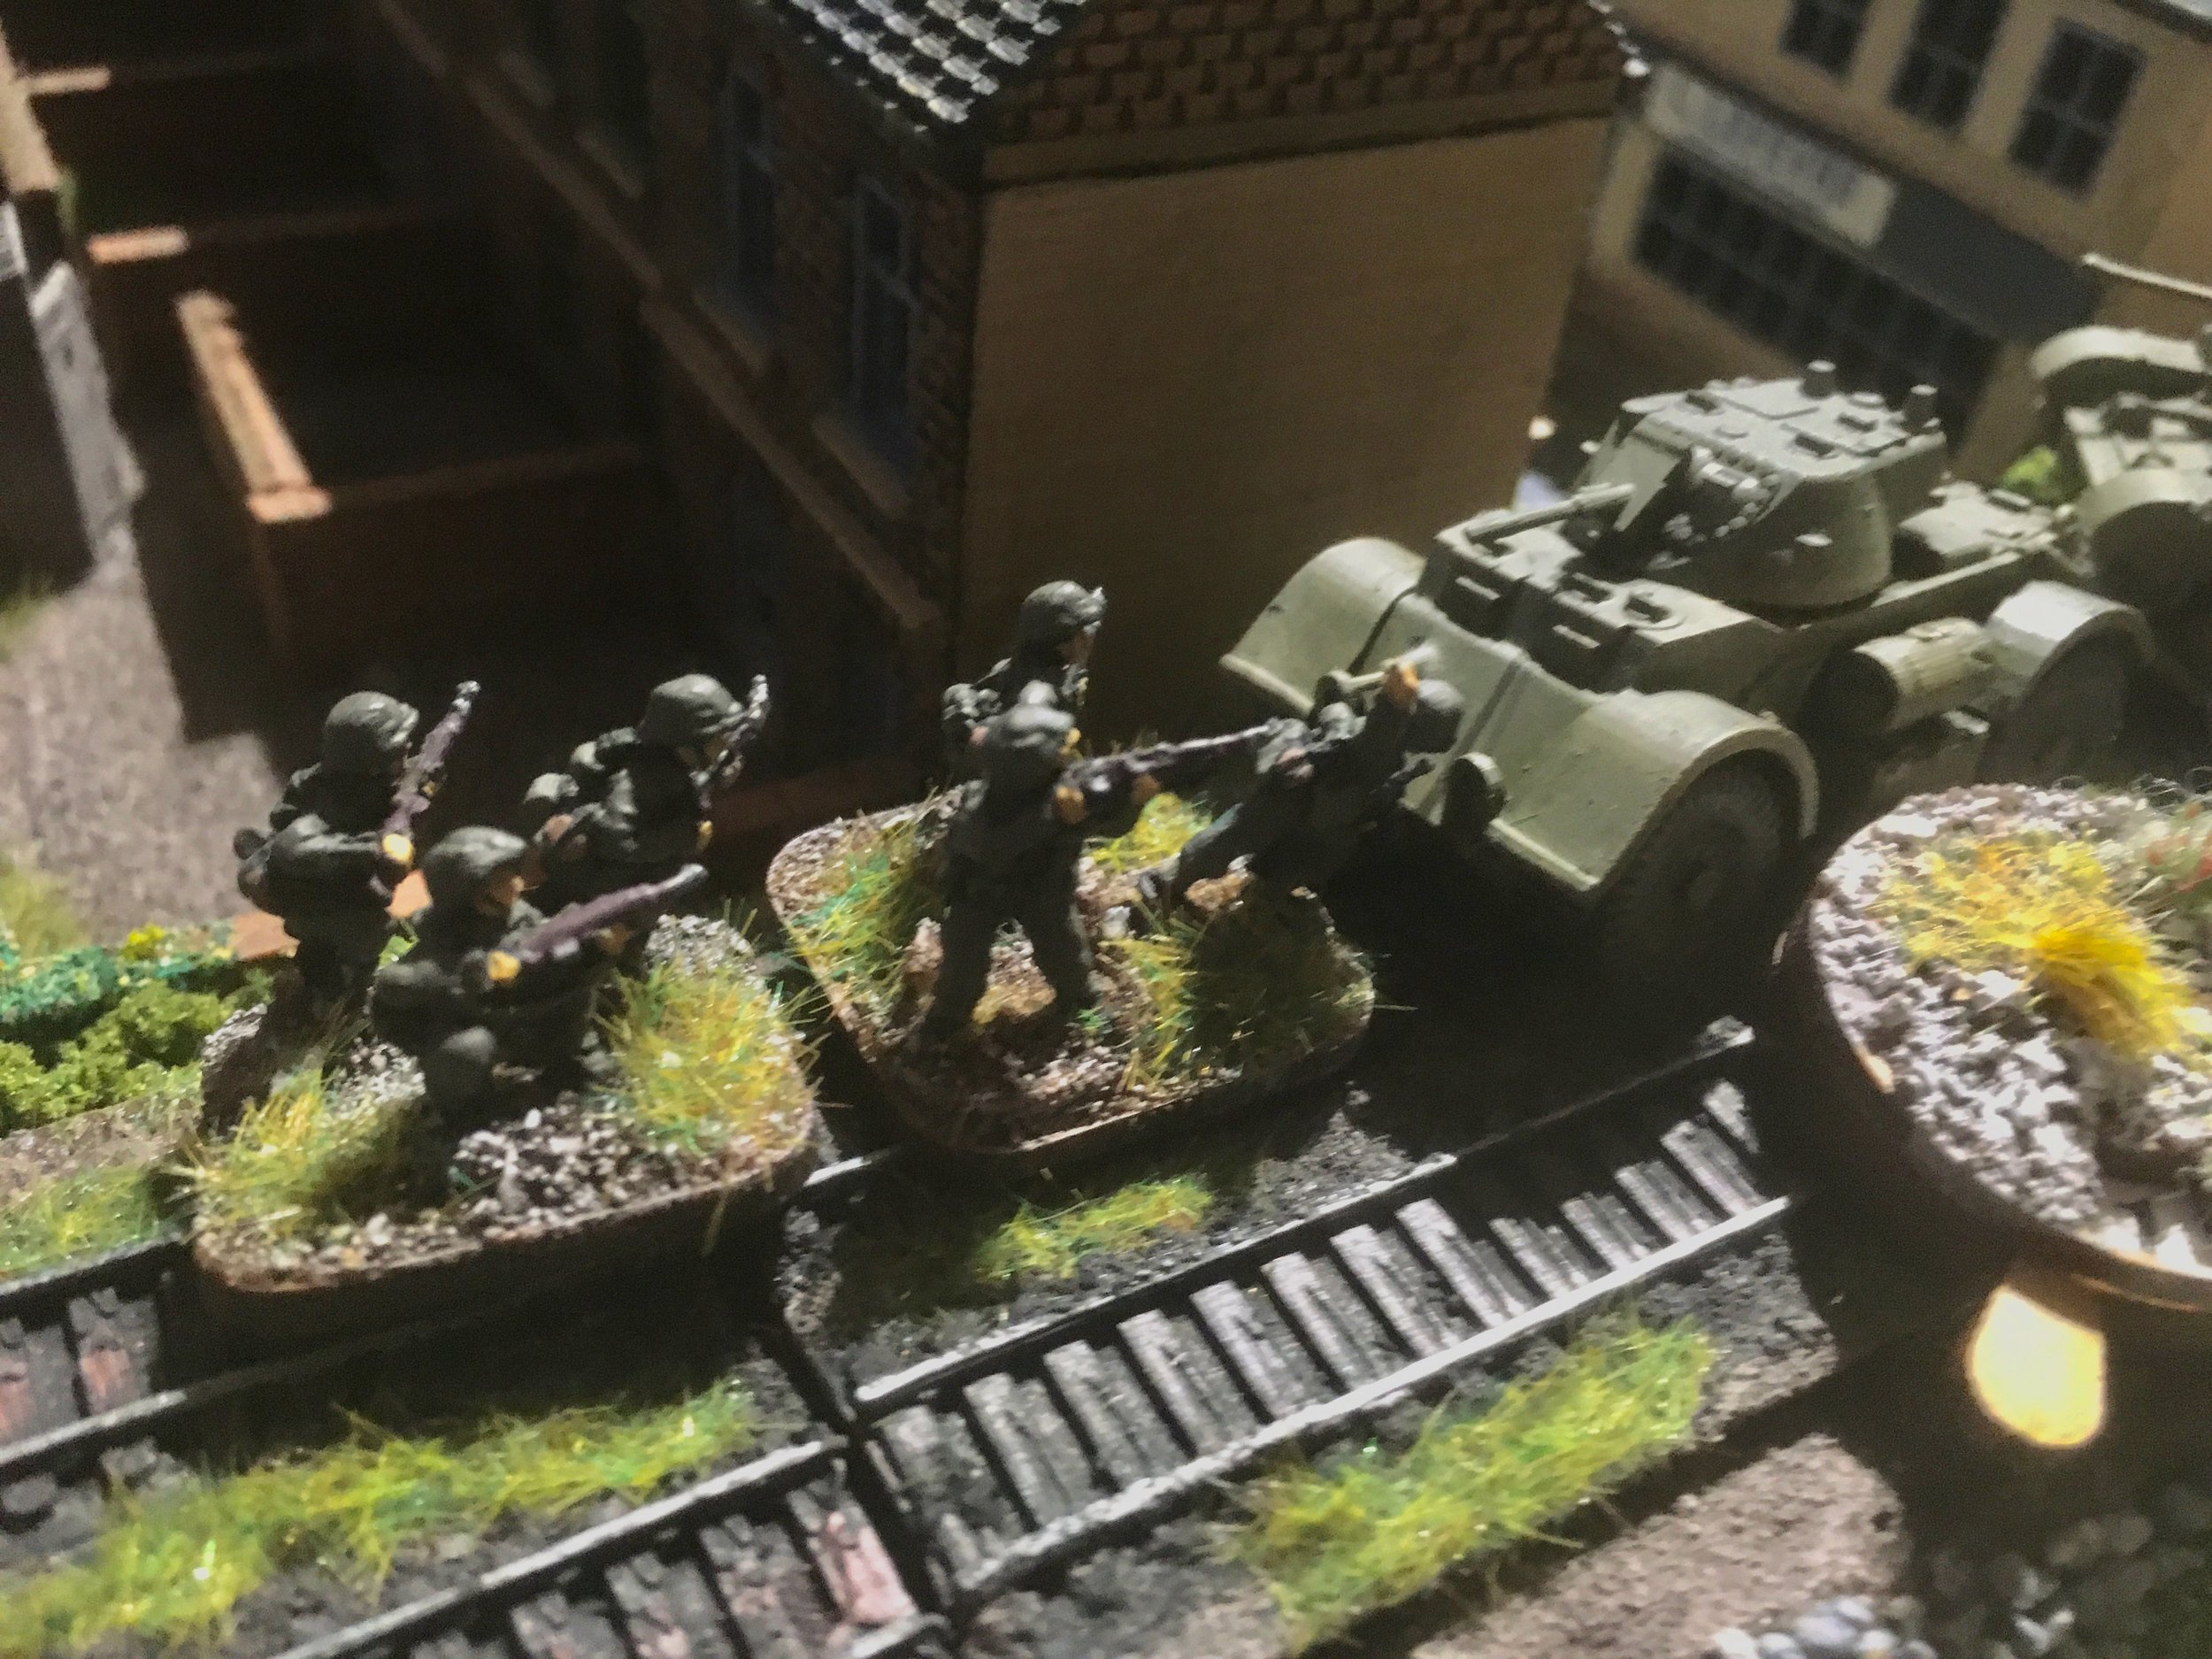 Whilst the remaining infantry there attempted a desperate, but unsuccessful, close assault on the Staghound.